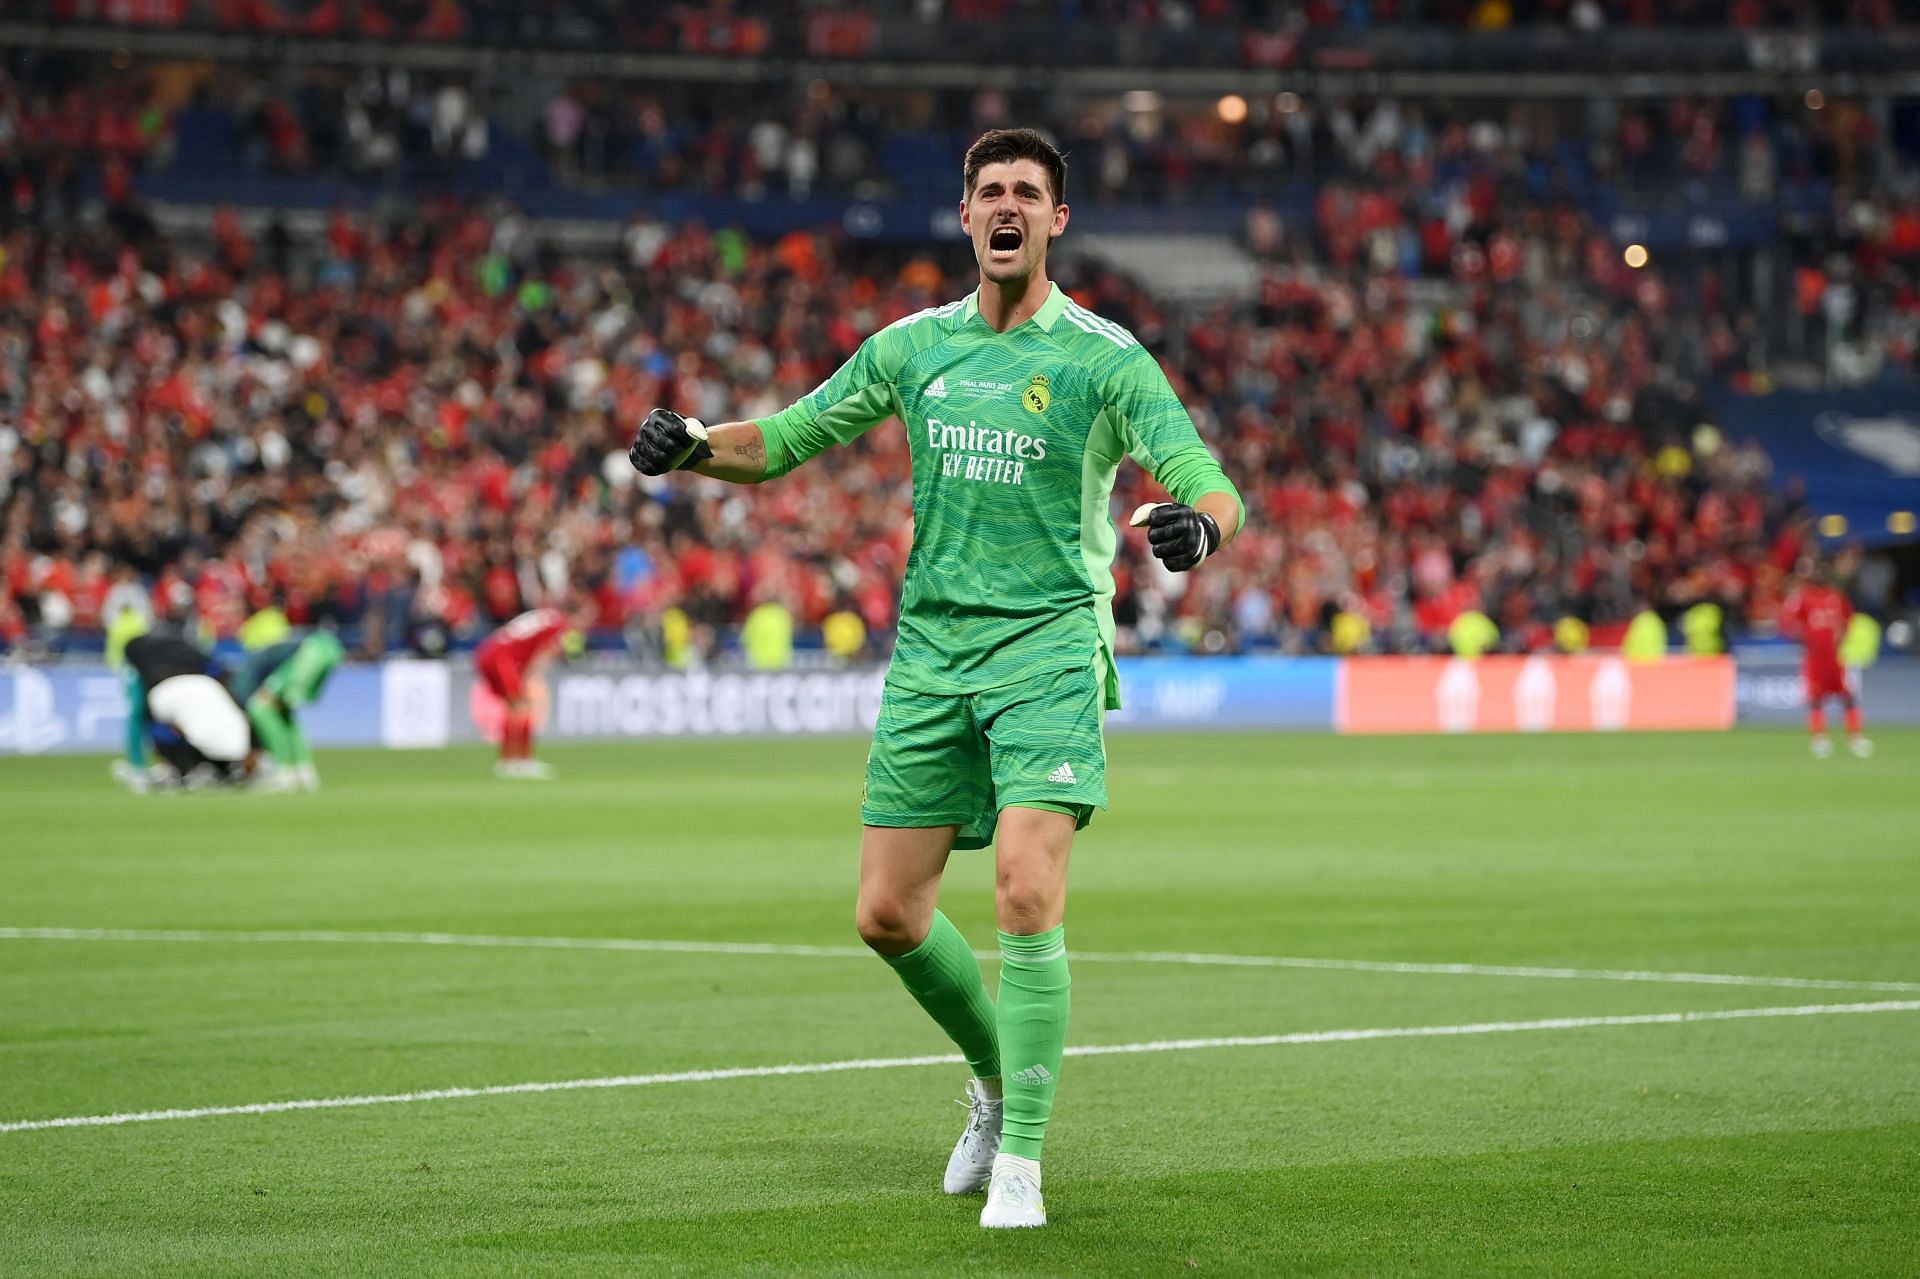 Courtois was named man of the match for his performance in the fnal